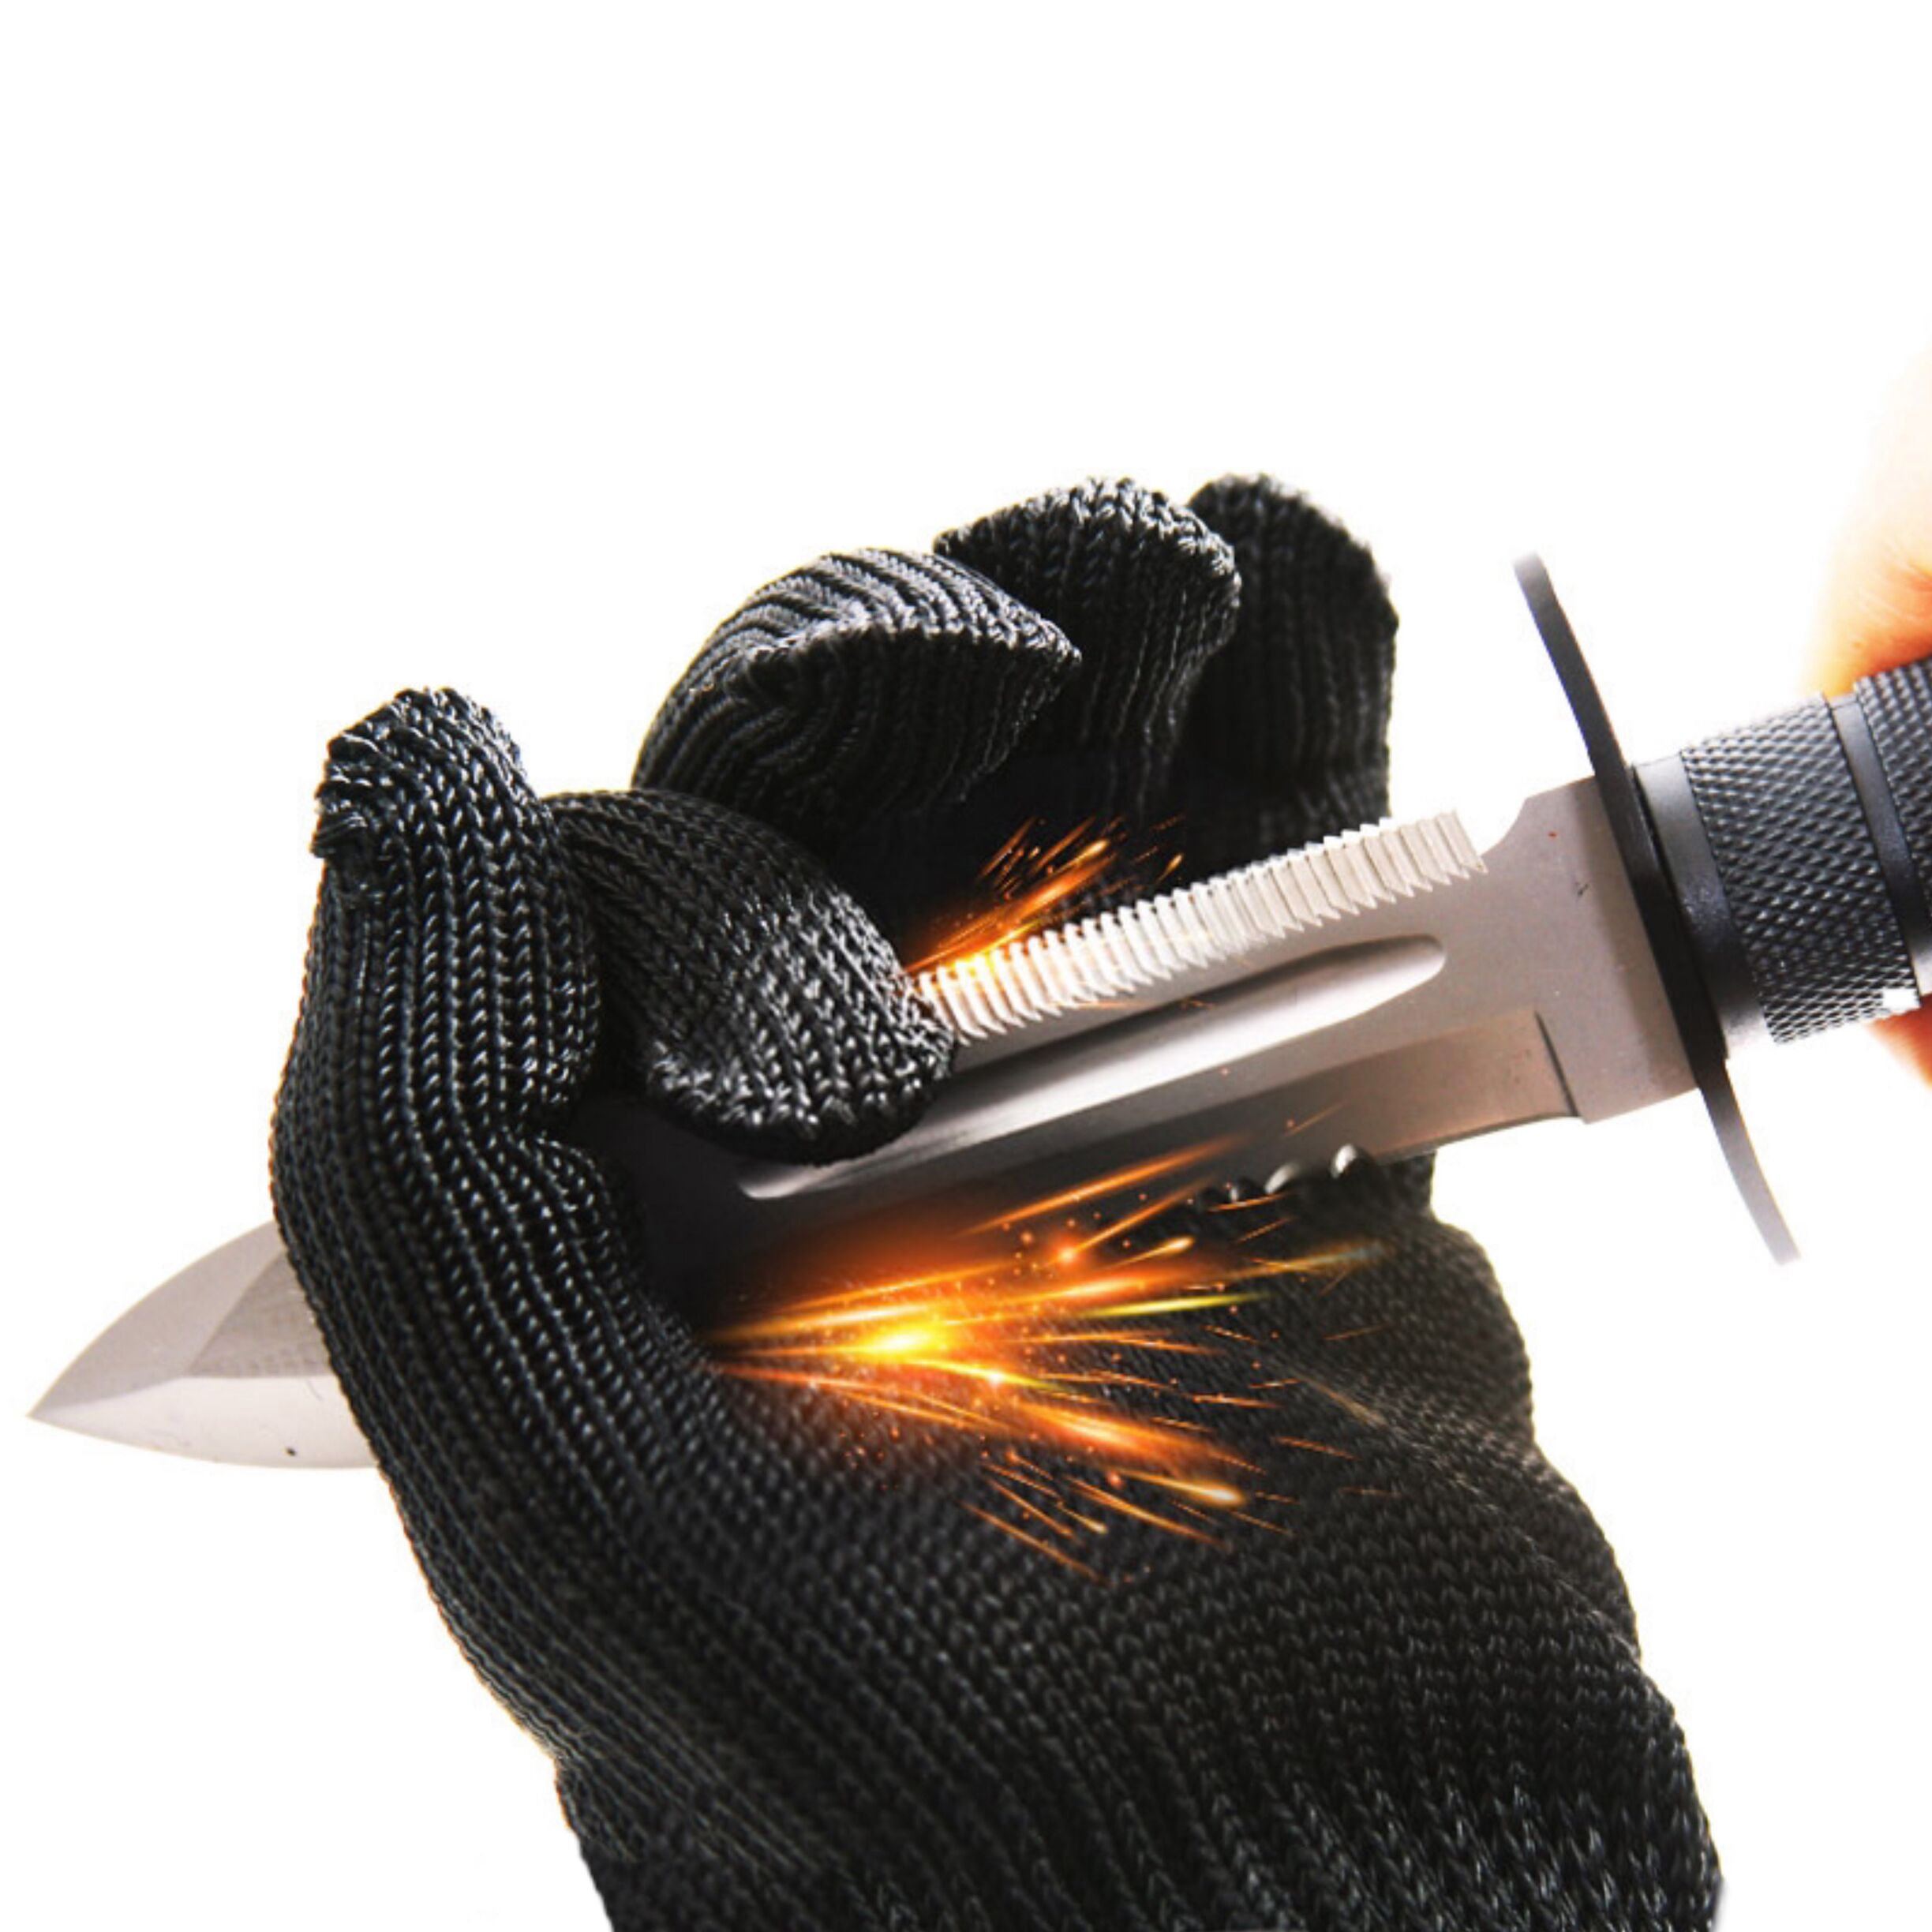 Level 5 Protection Anti-slip Black Stainless Steel Wire Mesh Safety Work Cut Resistant Gloves